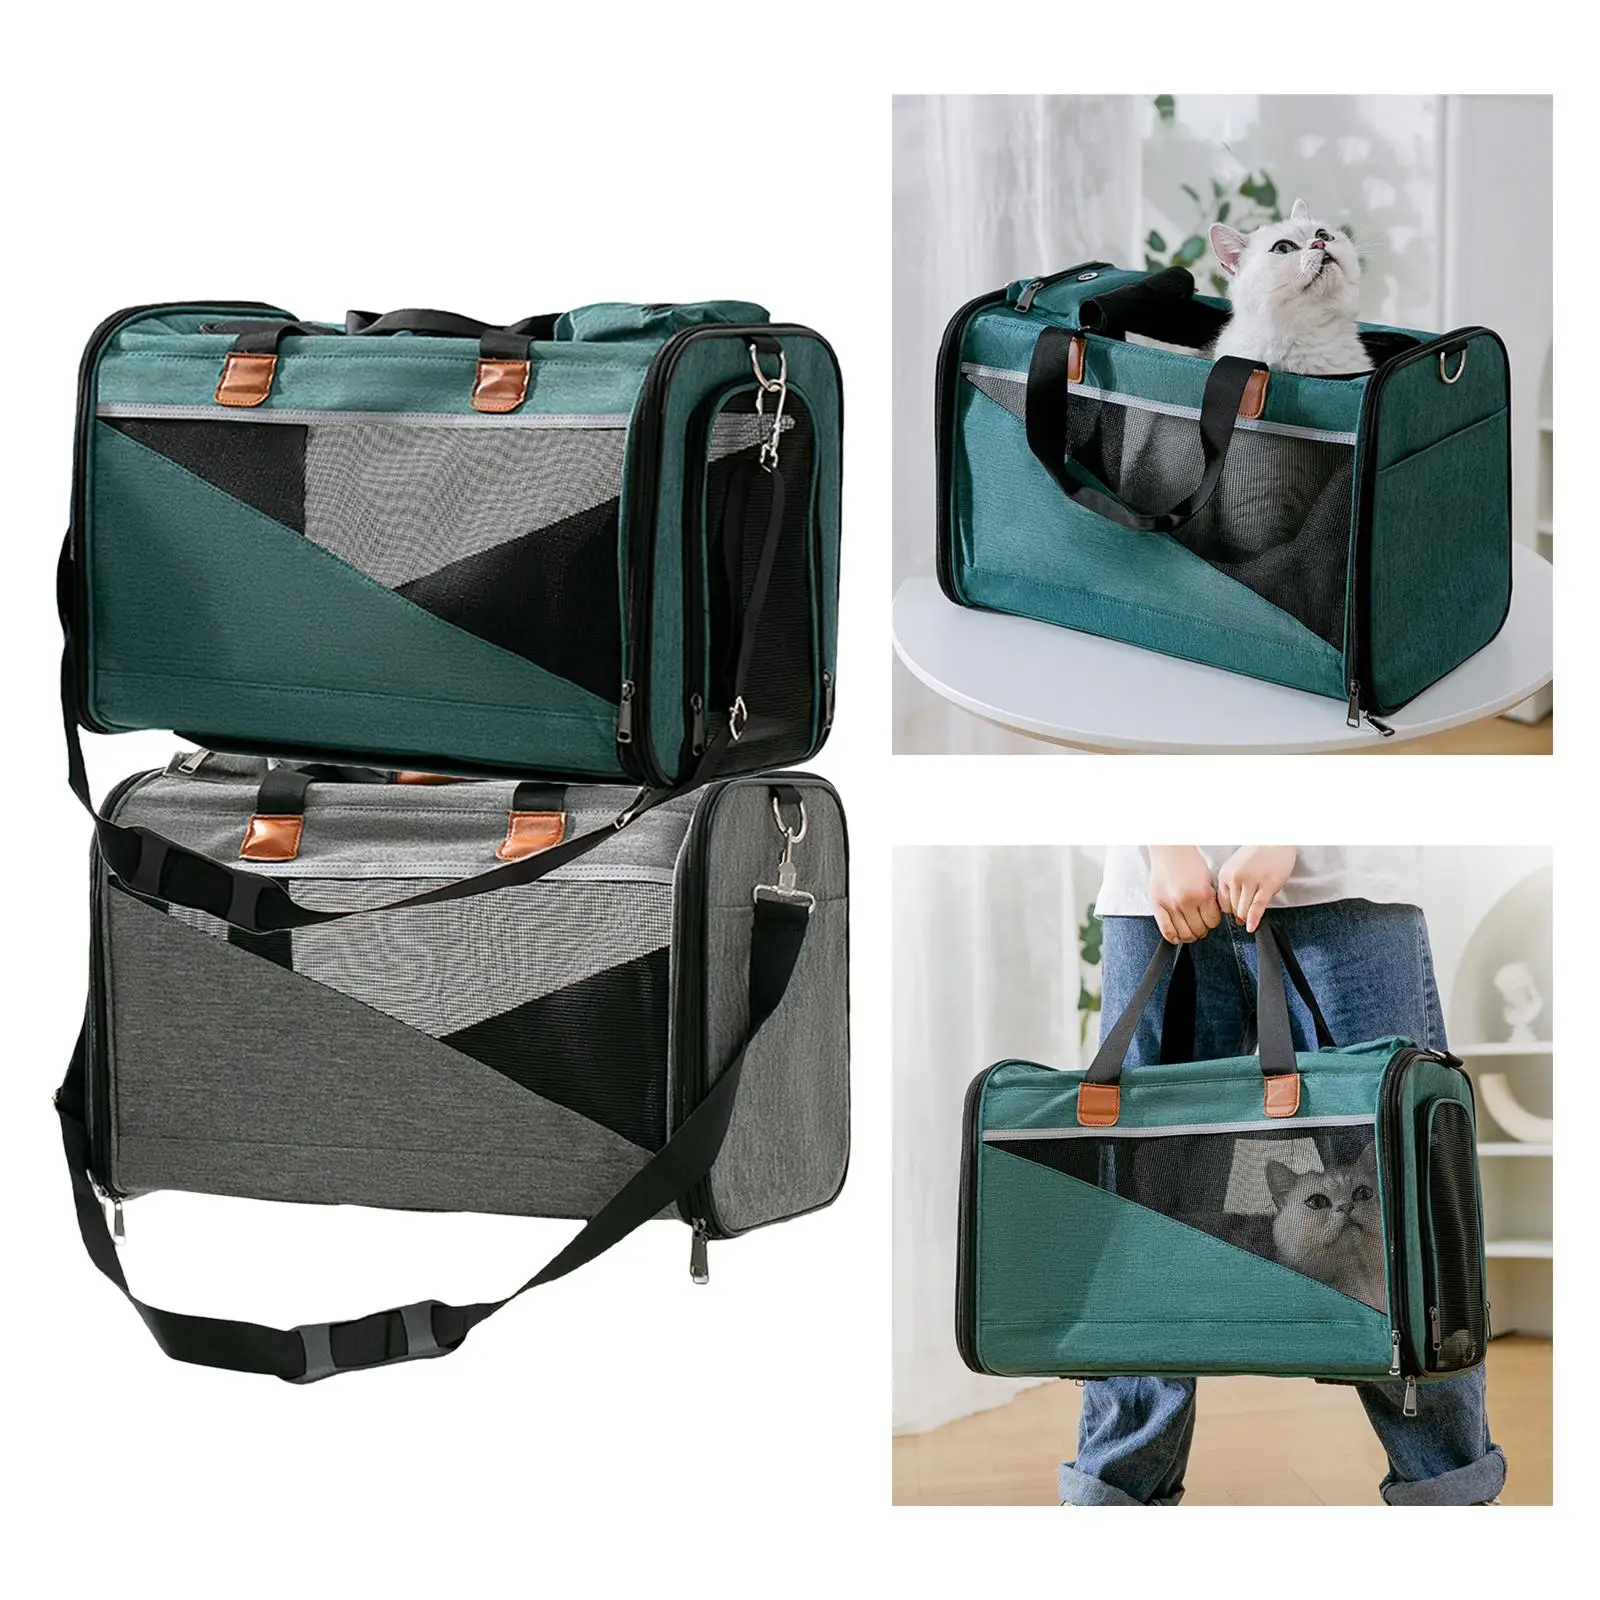 Pet Travel Carrier Cat Carrier Ventilated Lightweight for Small Medium Cats Easy Cleaning Breathable Mesh 19.3x10.8x12.4inch